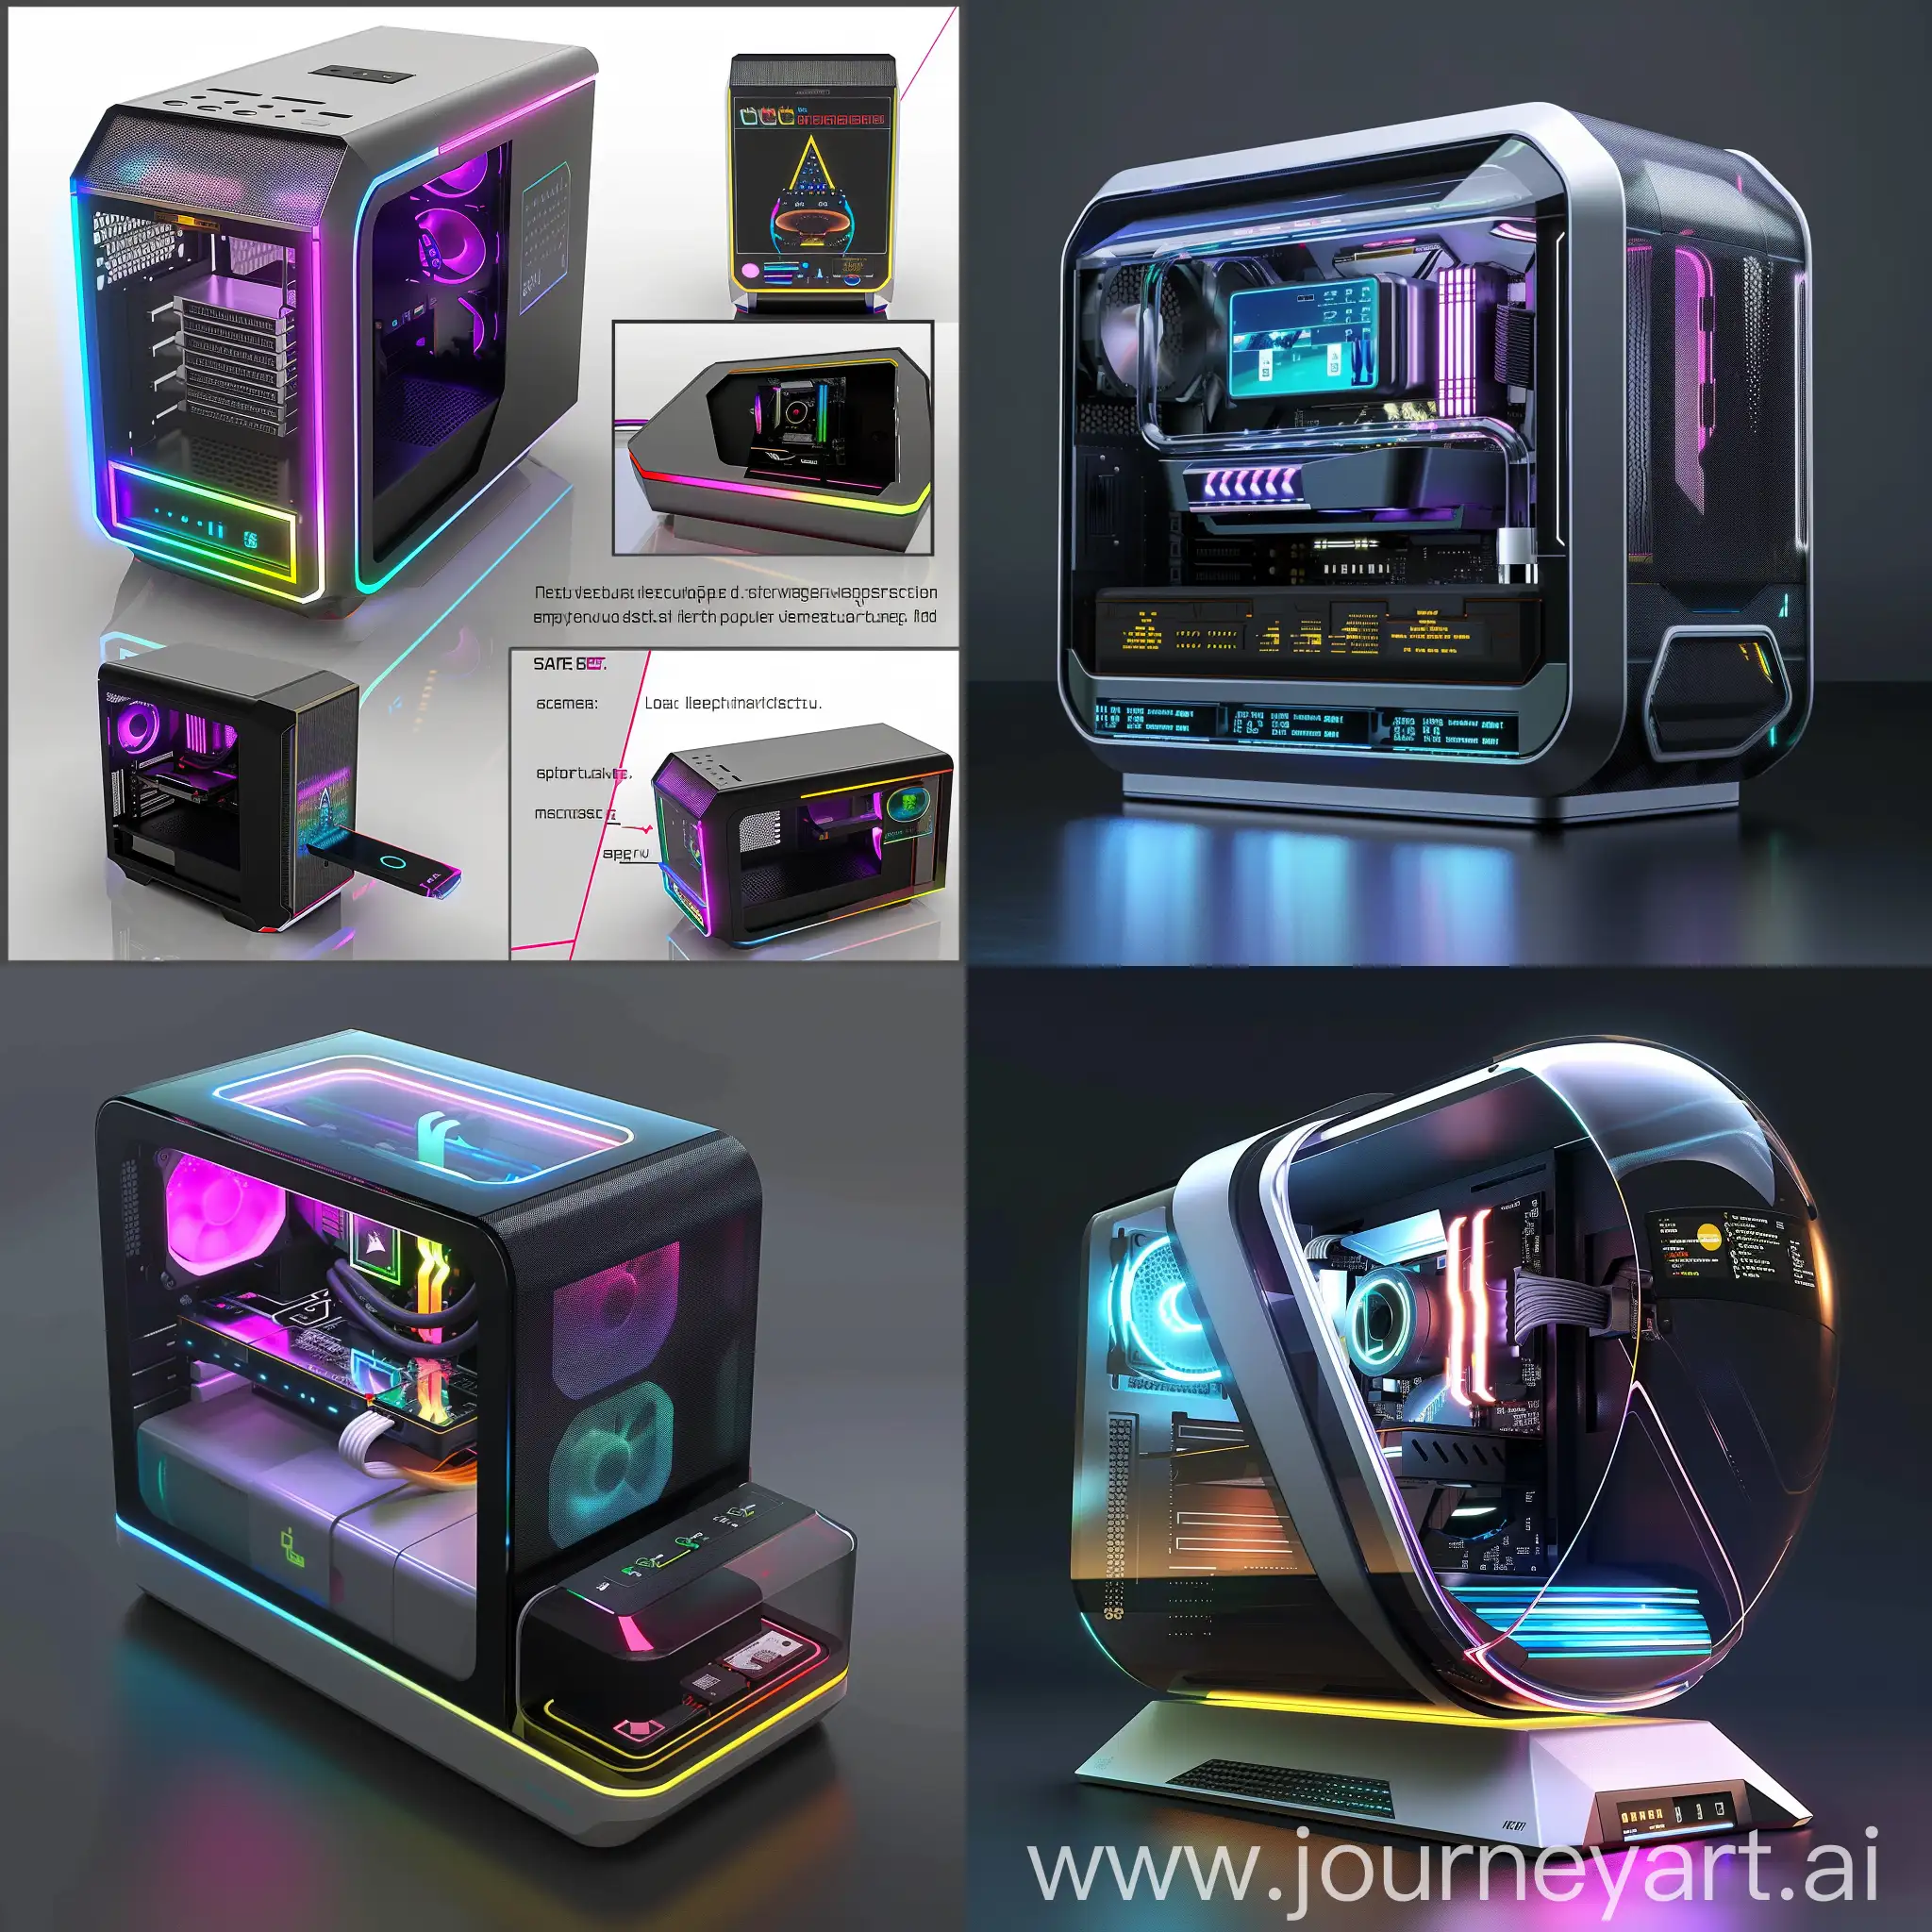 Futuristic-Modular-PC-Case-with-Liquid-Cooling-RGB-Lighting-and-Holographic-Interface